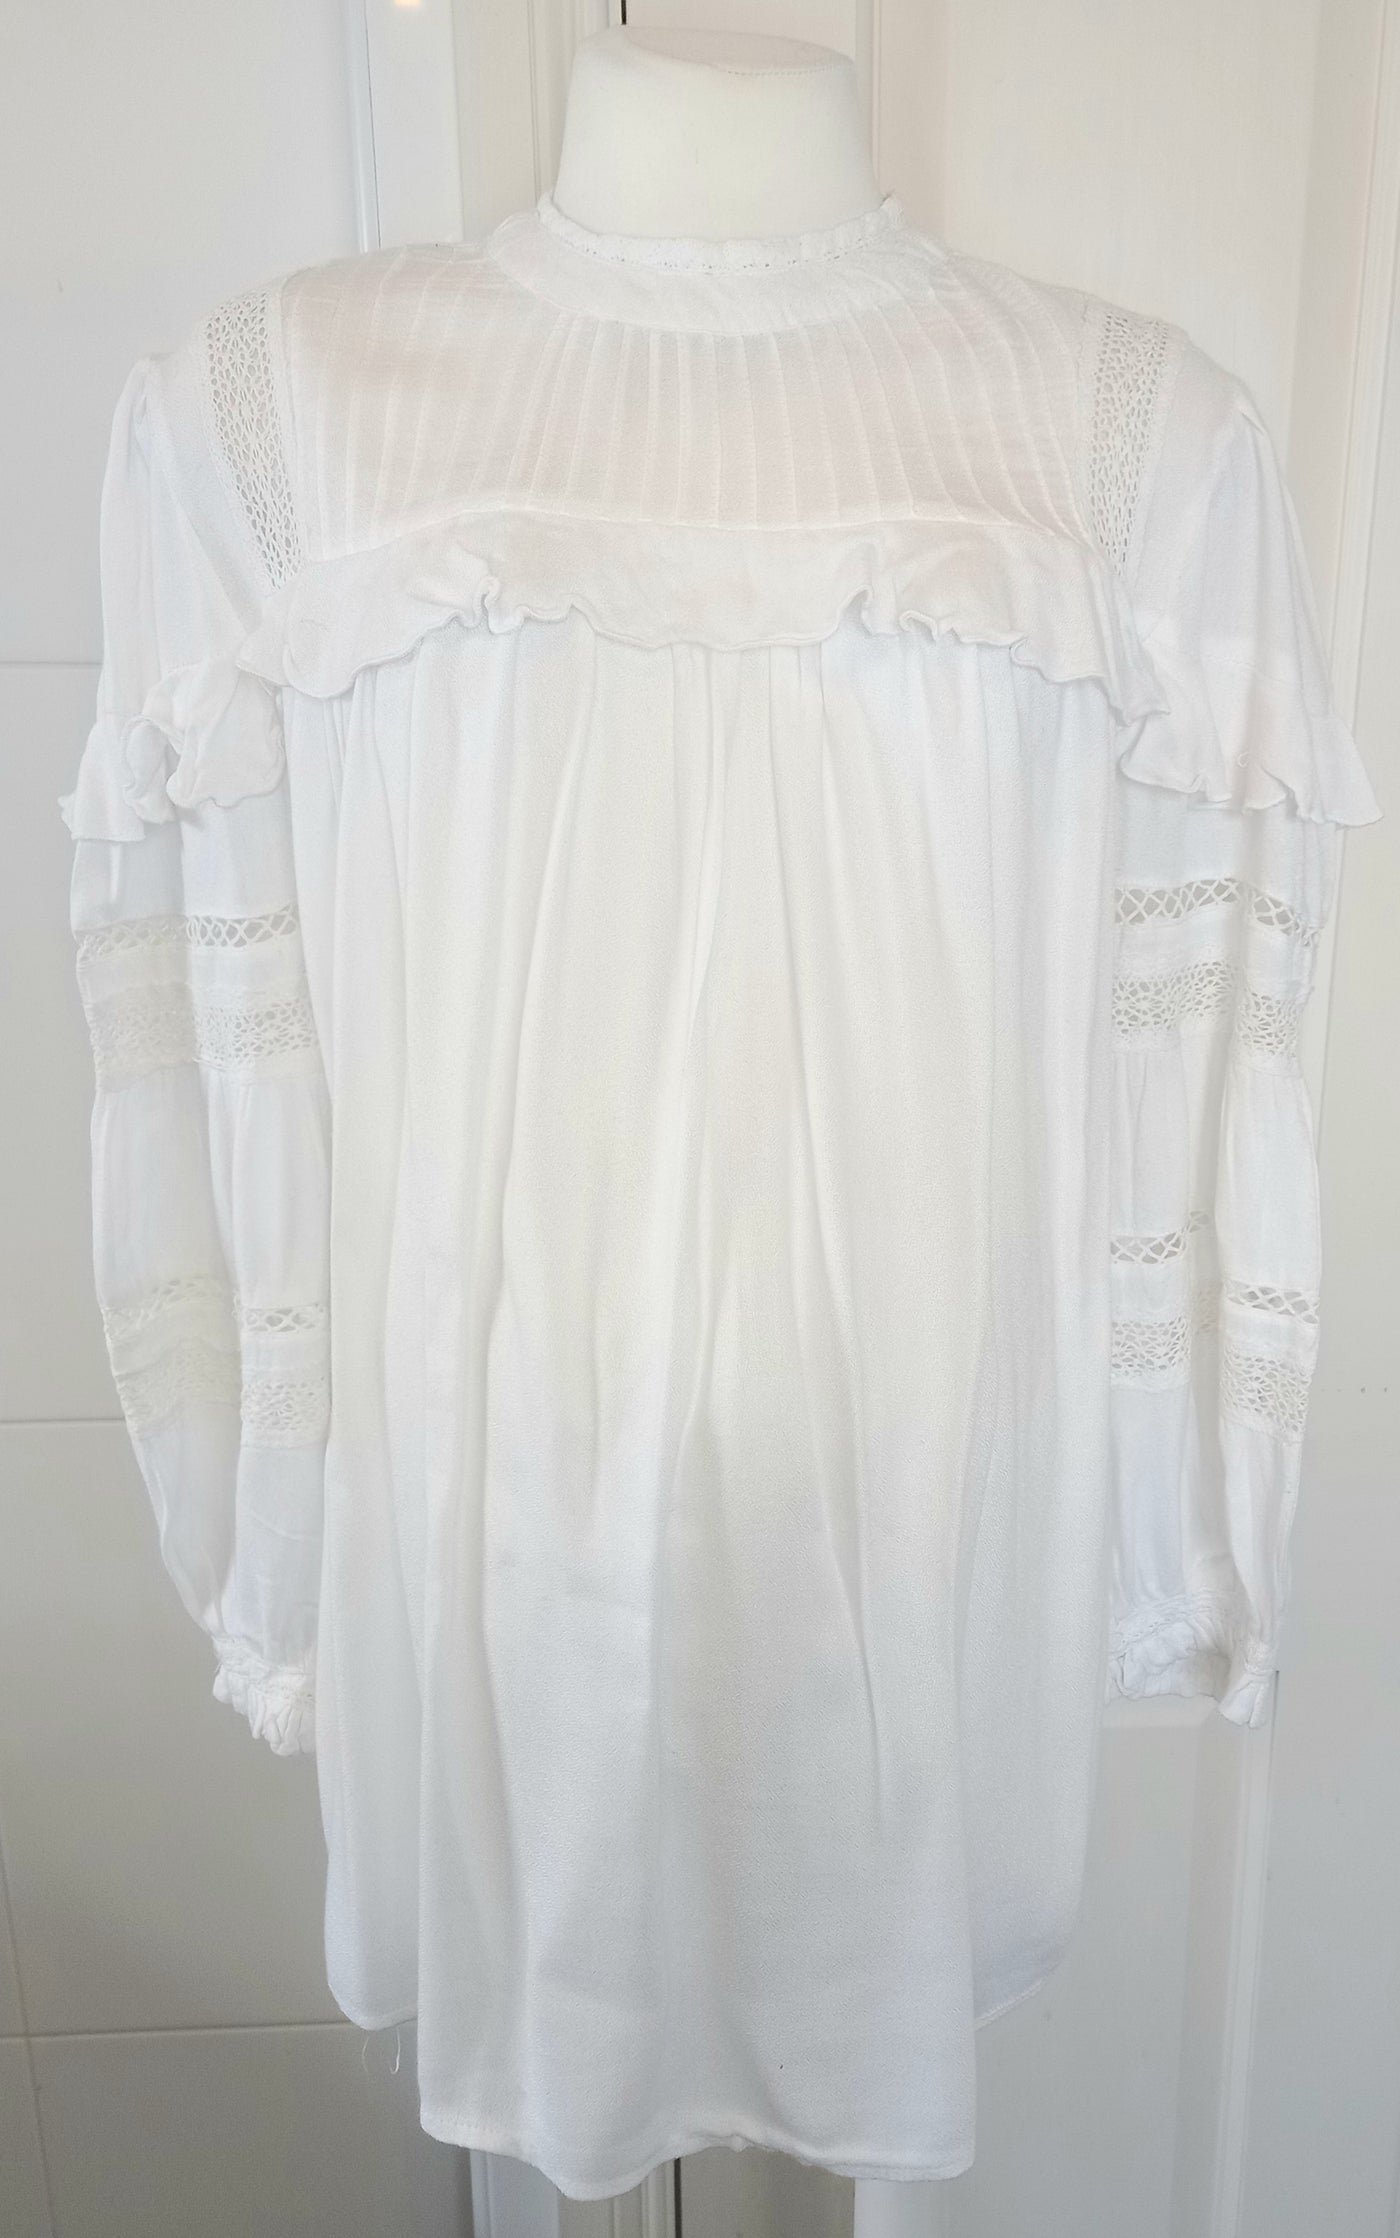 Dorothy Perkins Maternity White Top with Frill Front and Sleeve Detail - Size 14